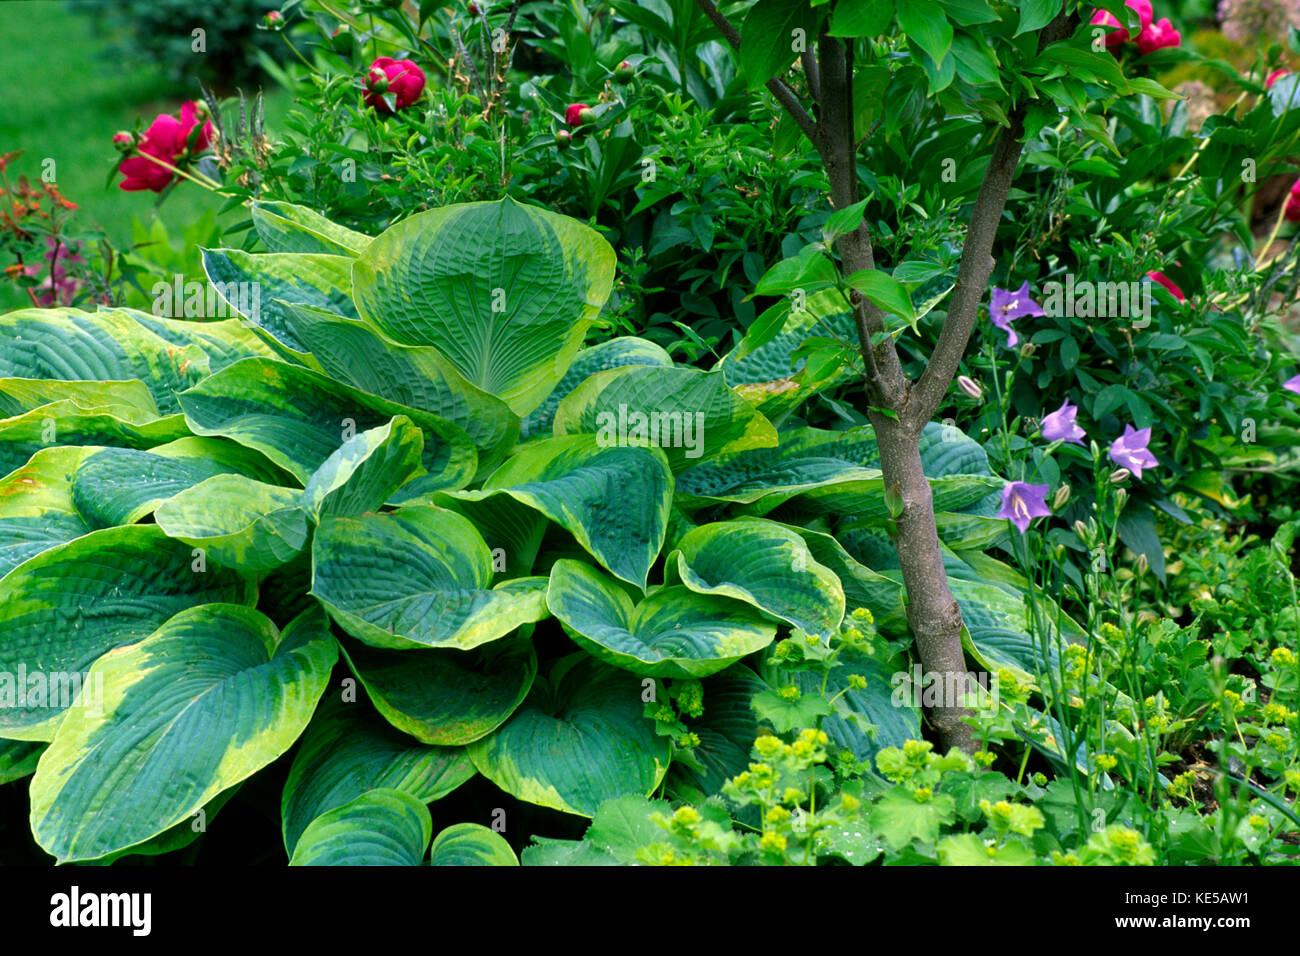 Garden in spring with Hosta Frances Williams, Peoly, Campanula and alchemilla, Stock Photo